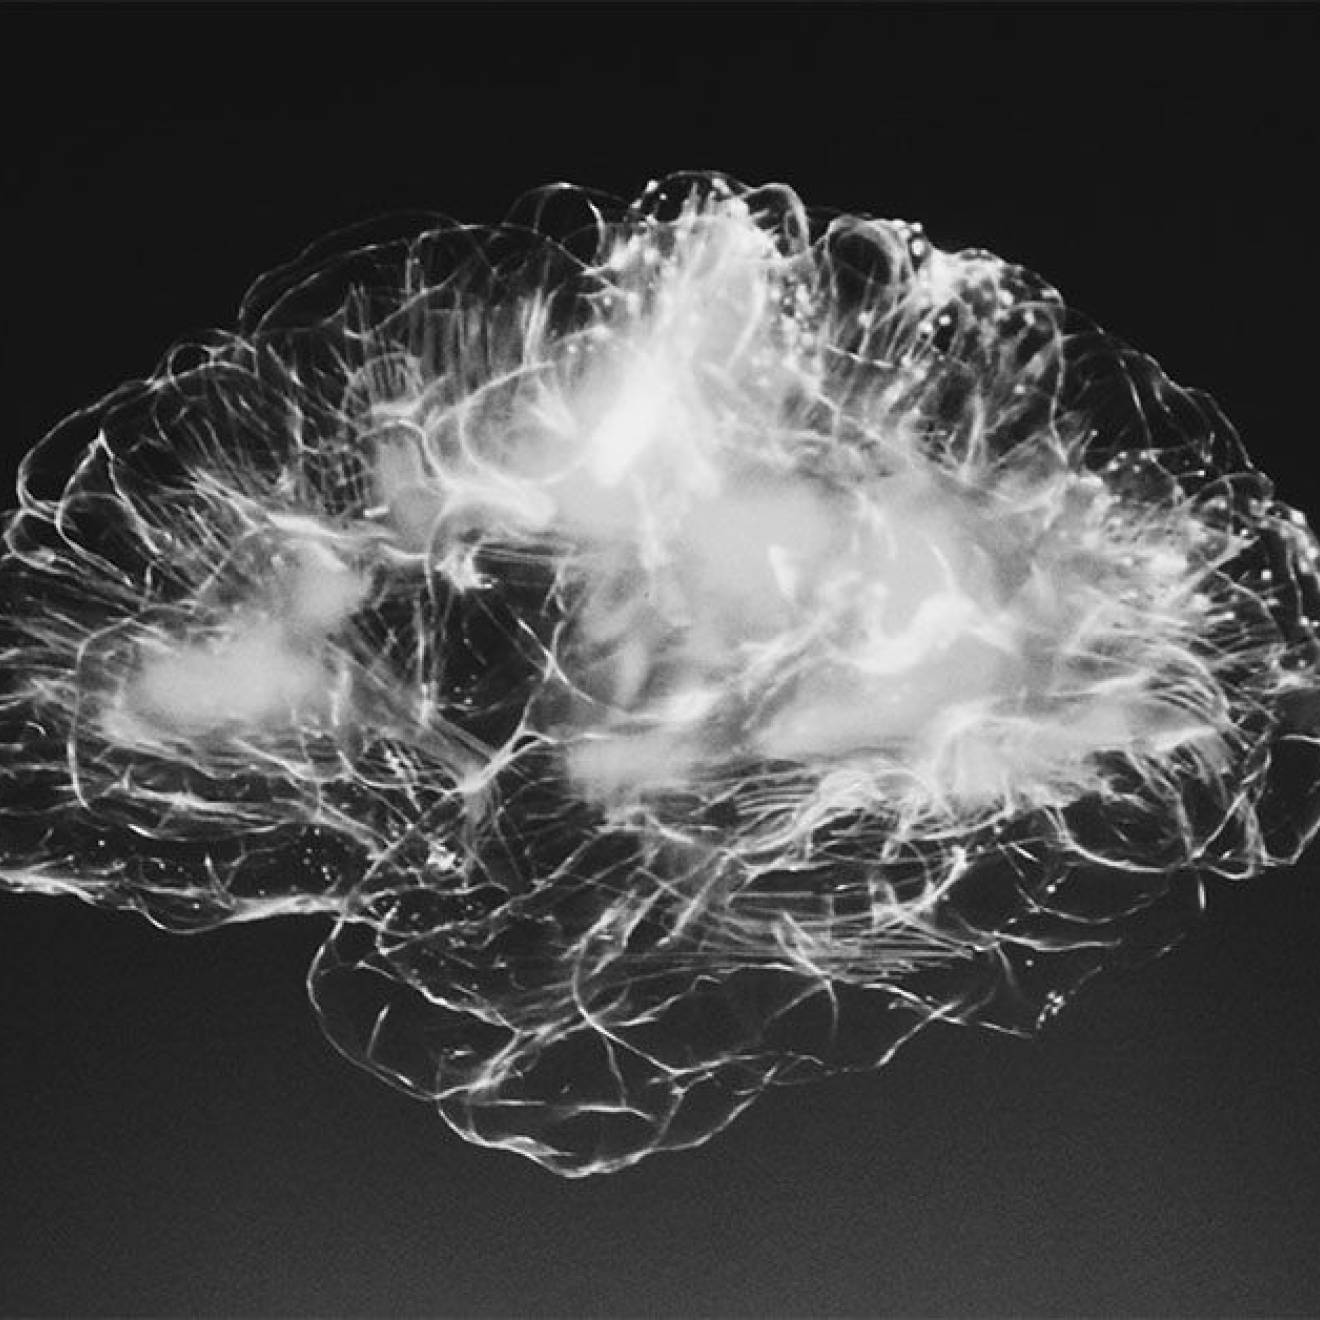 A 3-D-looking scan of a brain appears white against a dark background